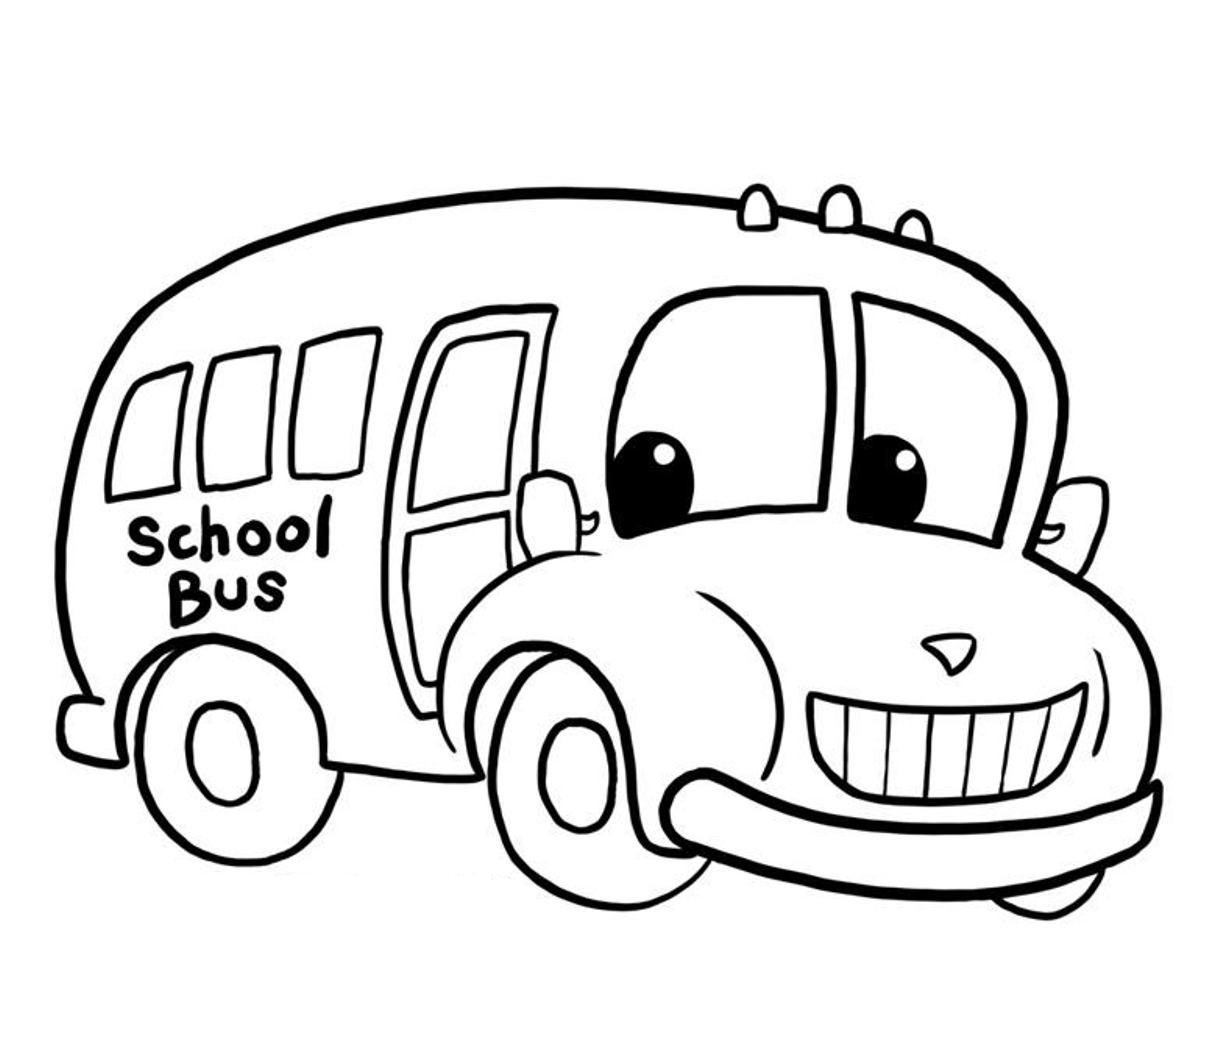 School Bus Coloring Page Picture | Transportation Coloring pages ...